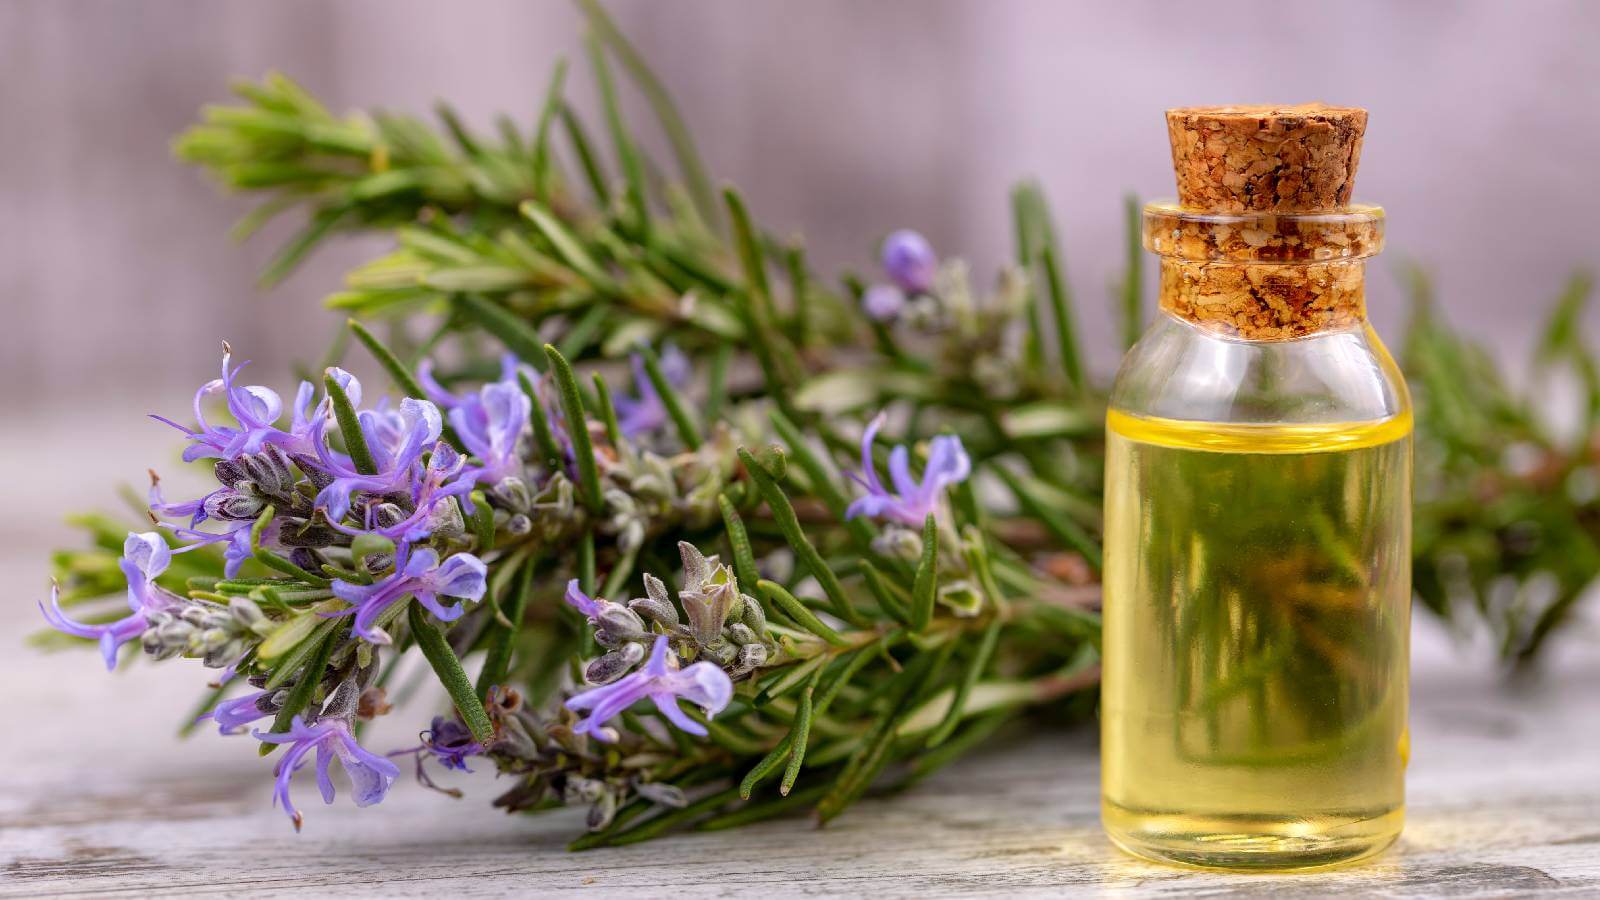 Sprigs of rosemary next to a bottle of rosemary oil